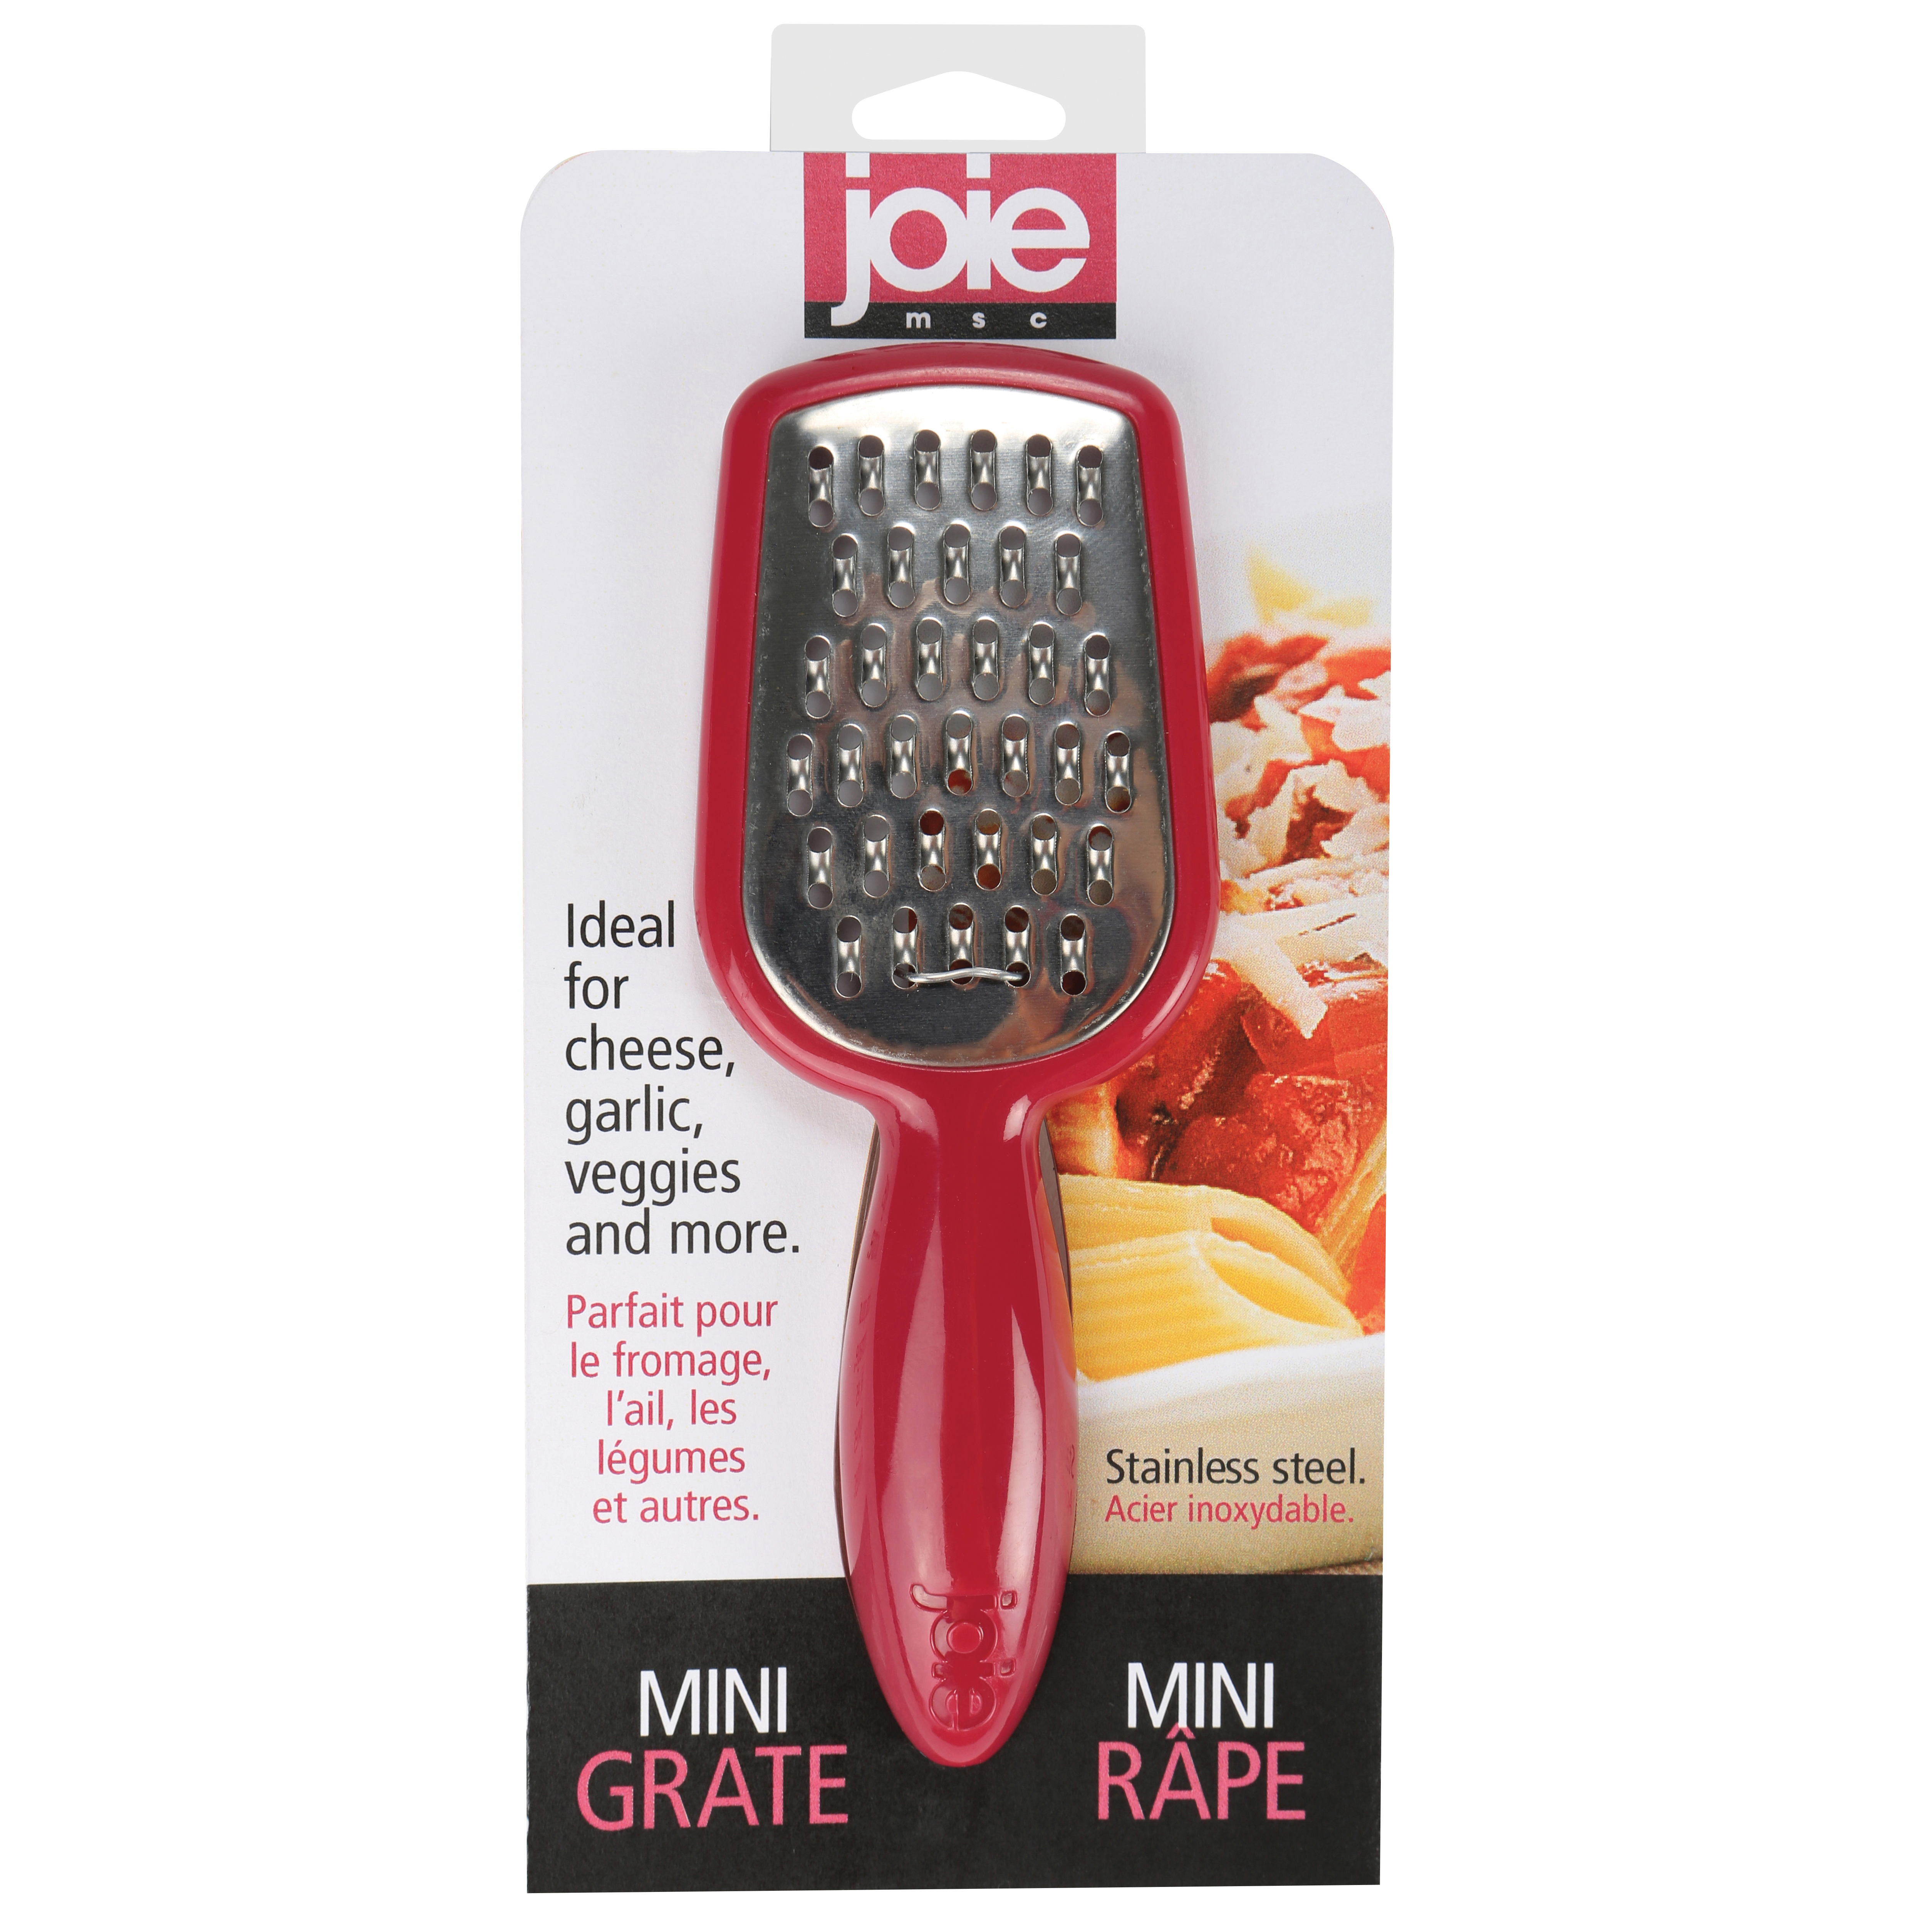 Joie 26662 Mini Grater, Stainless Steel - 2